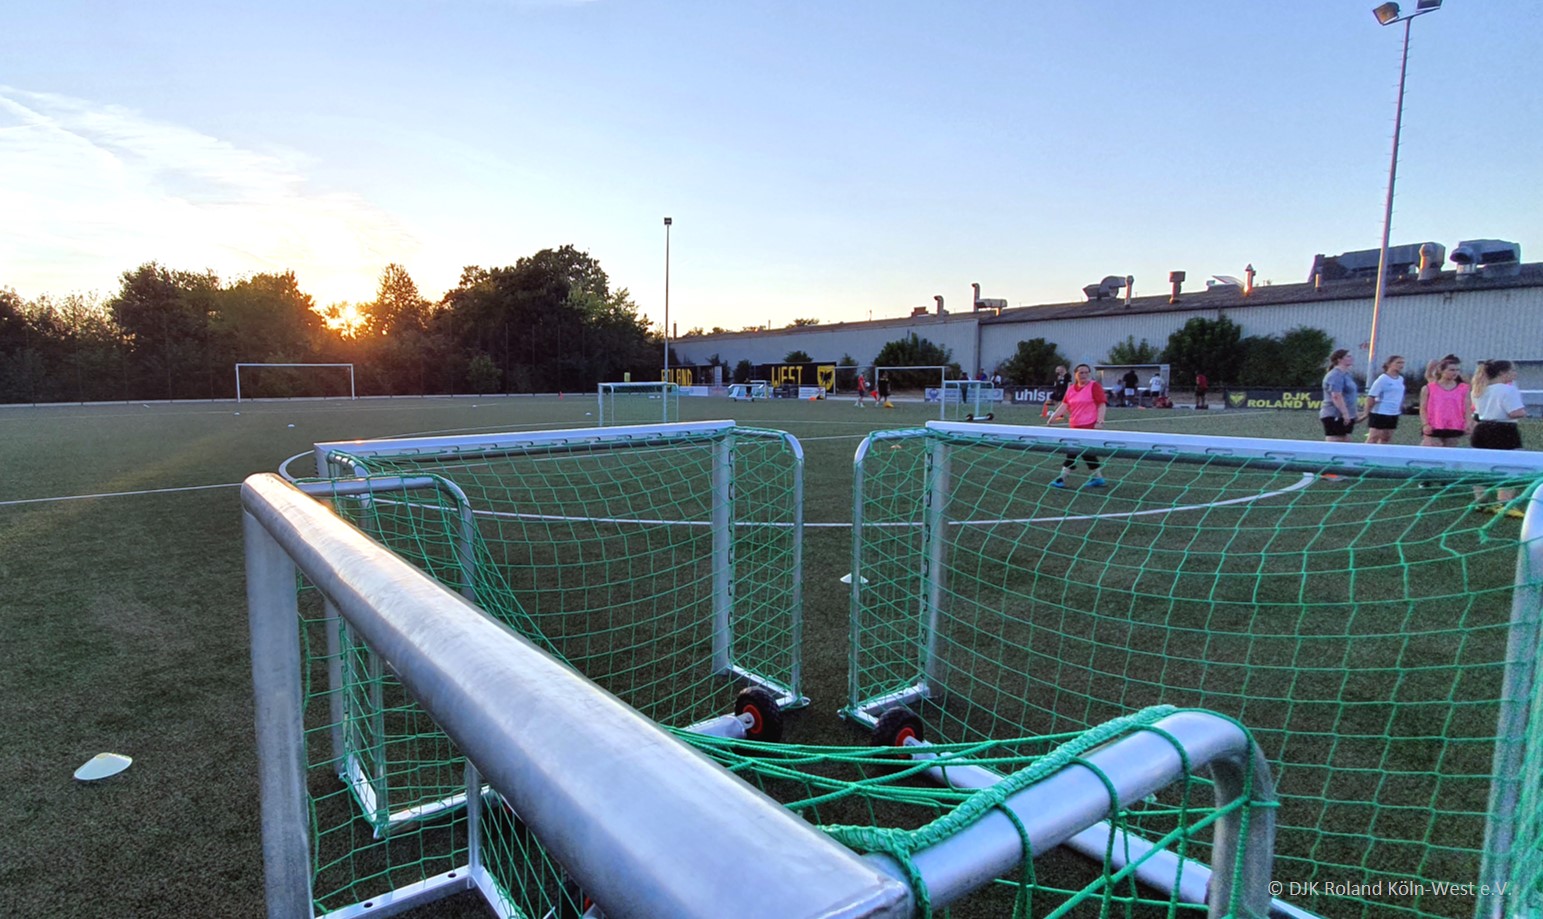 Mini soccer goal for training and leisure from artec Sportgeräte